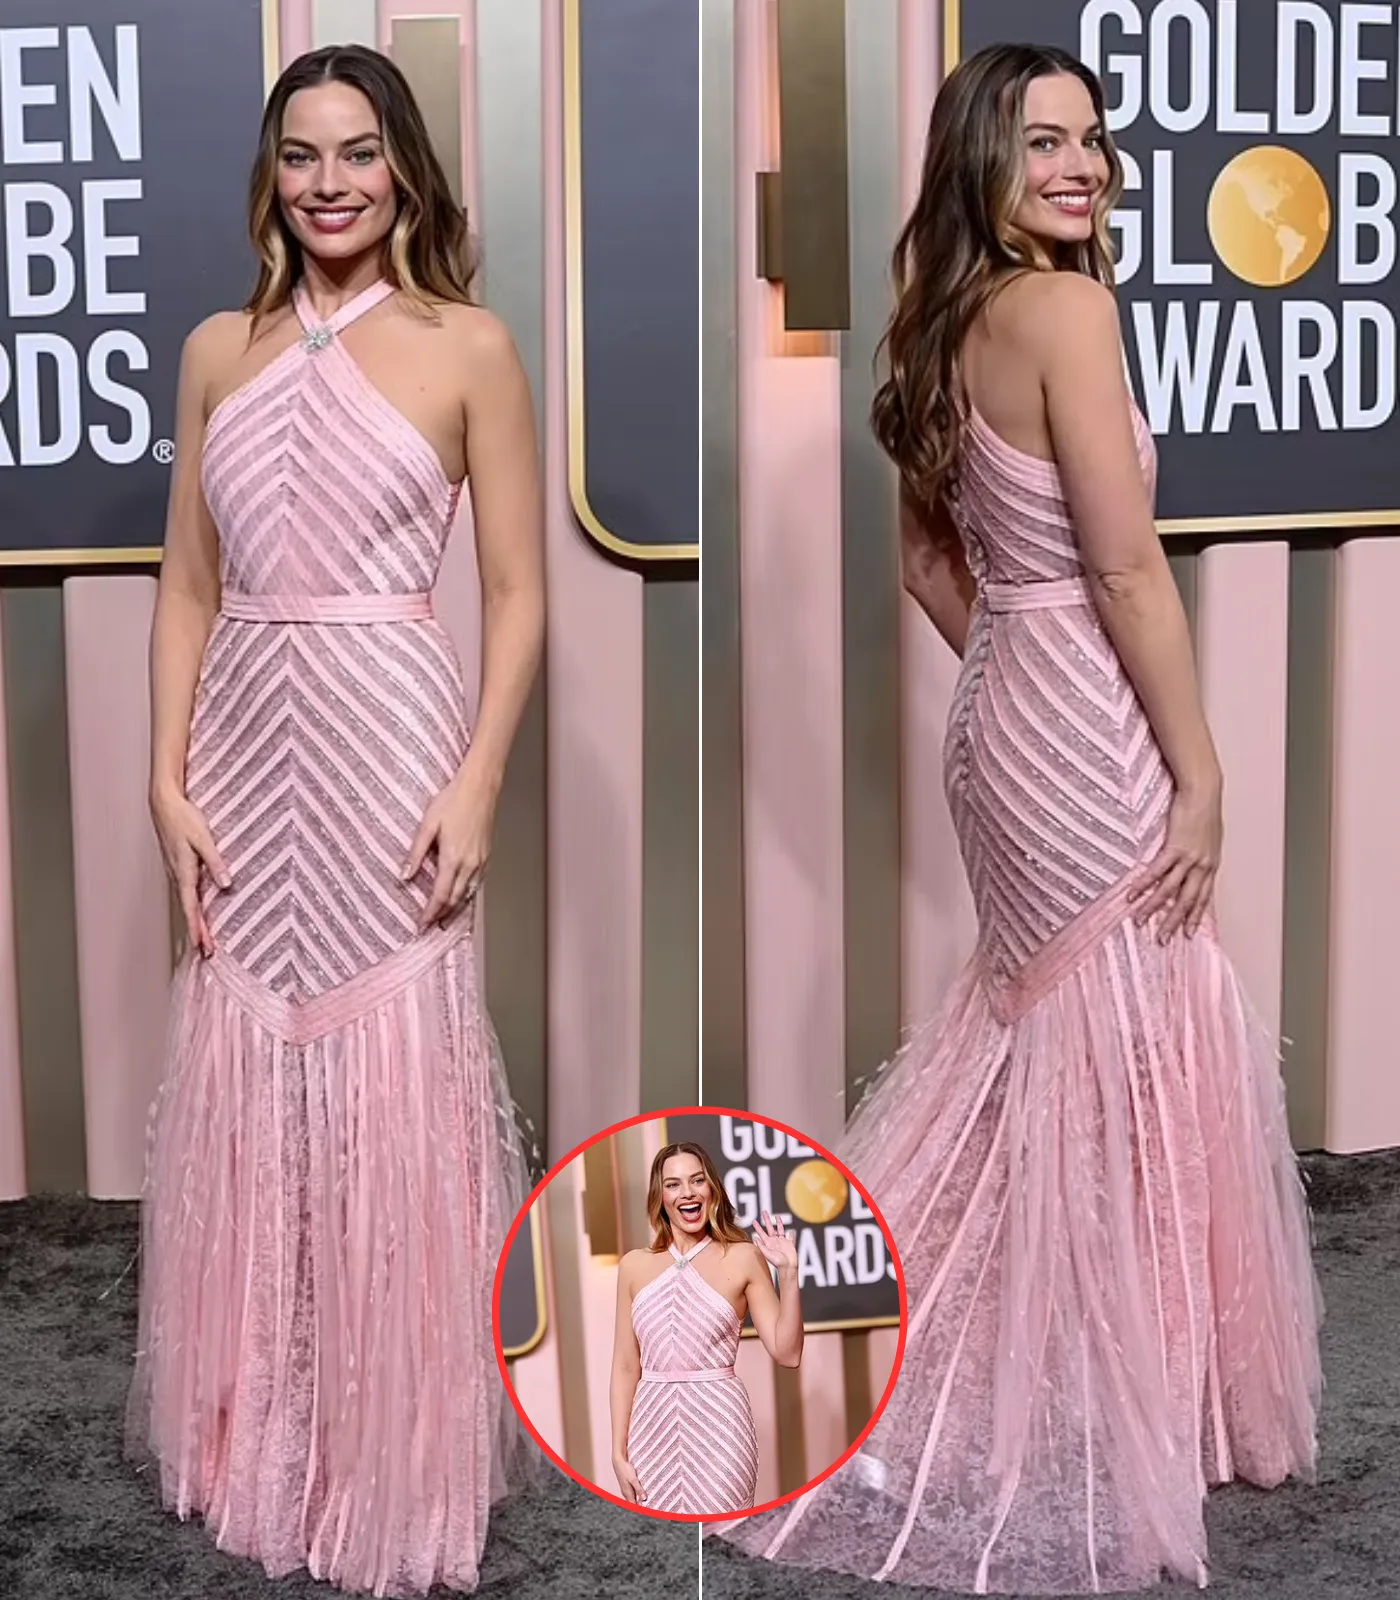 Barbie girl! Margot Robbie is pretty in a pink sheer sequinned Chanel dress as she dazzles on the red carpet at the Golden Globes